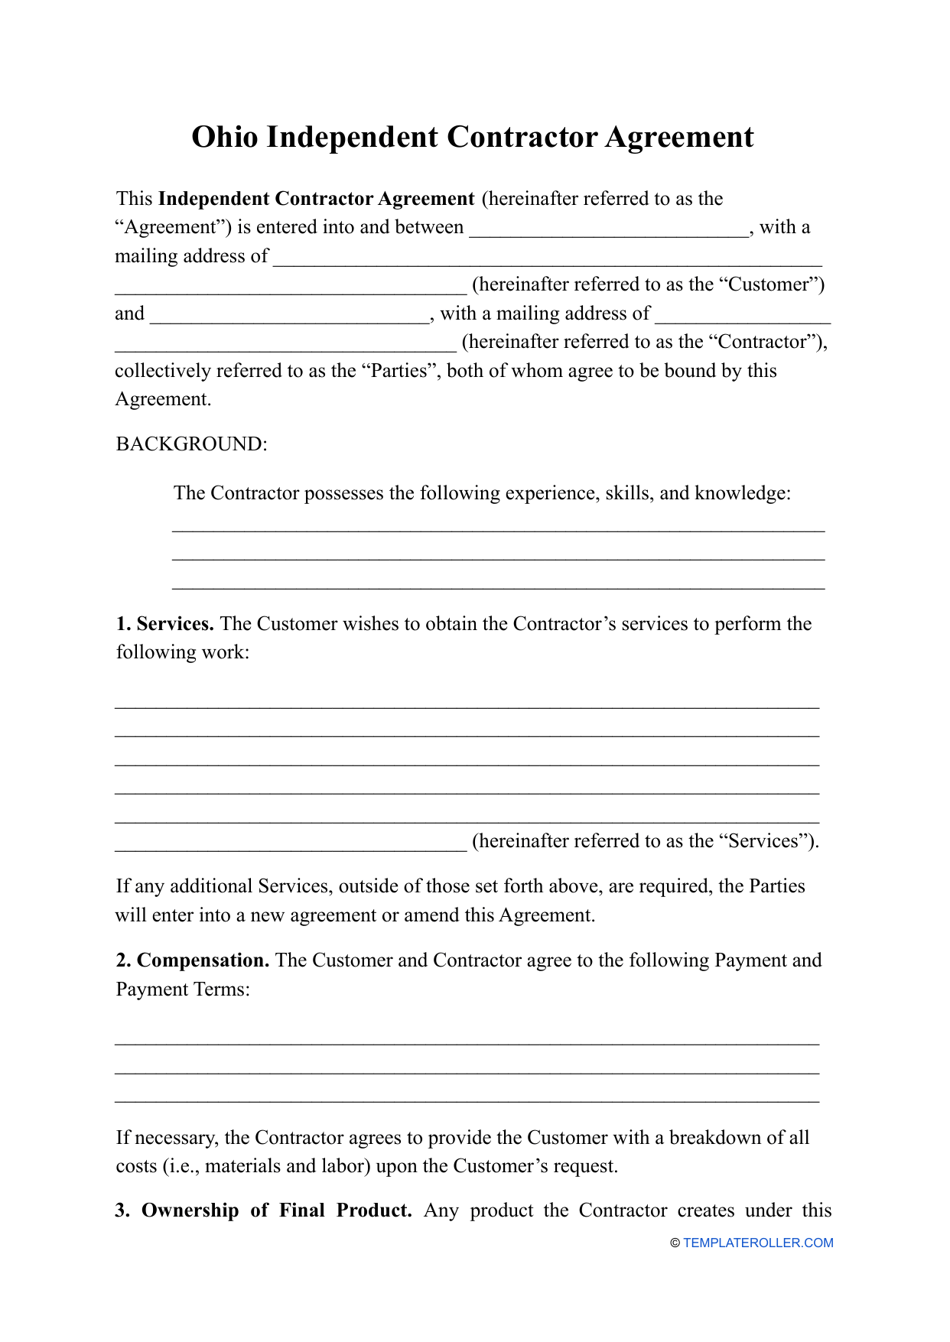 Independent Contractor Agreement Template - Ohio, Page 1